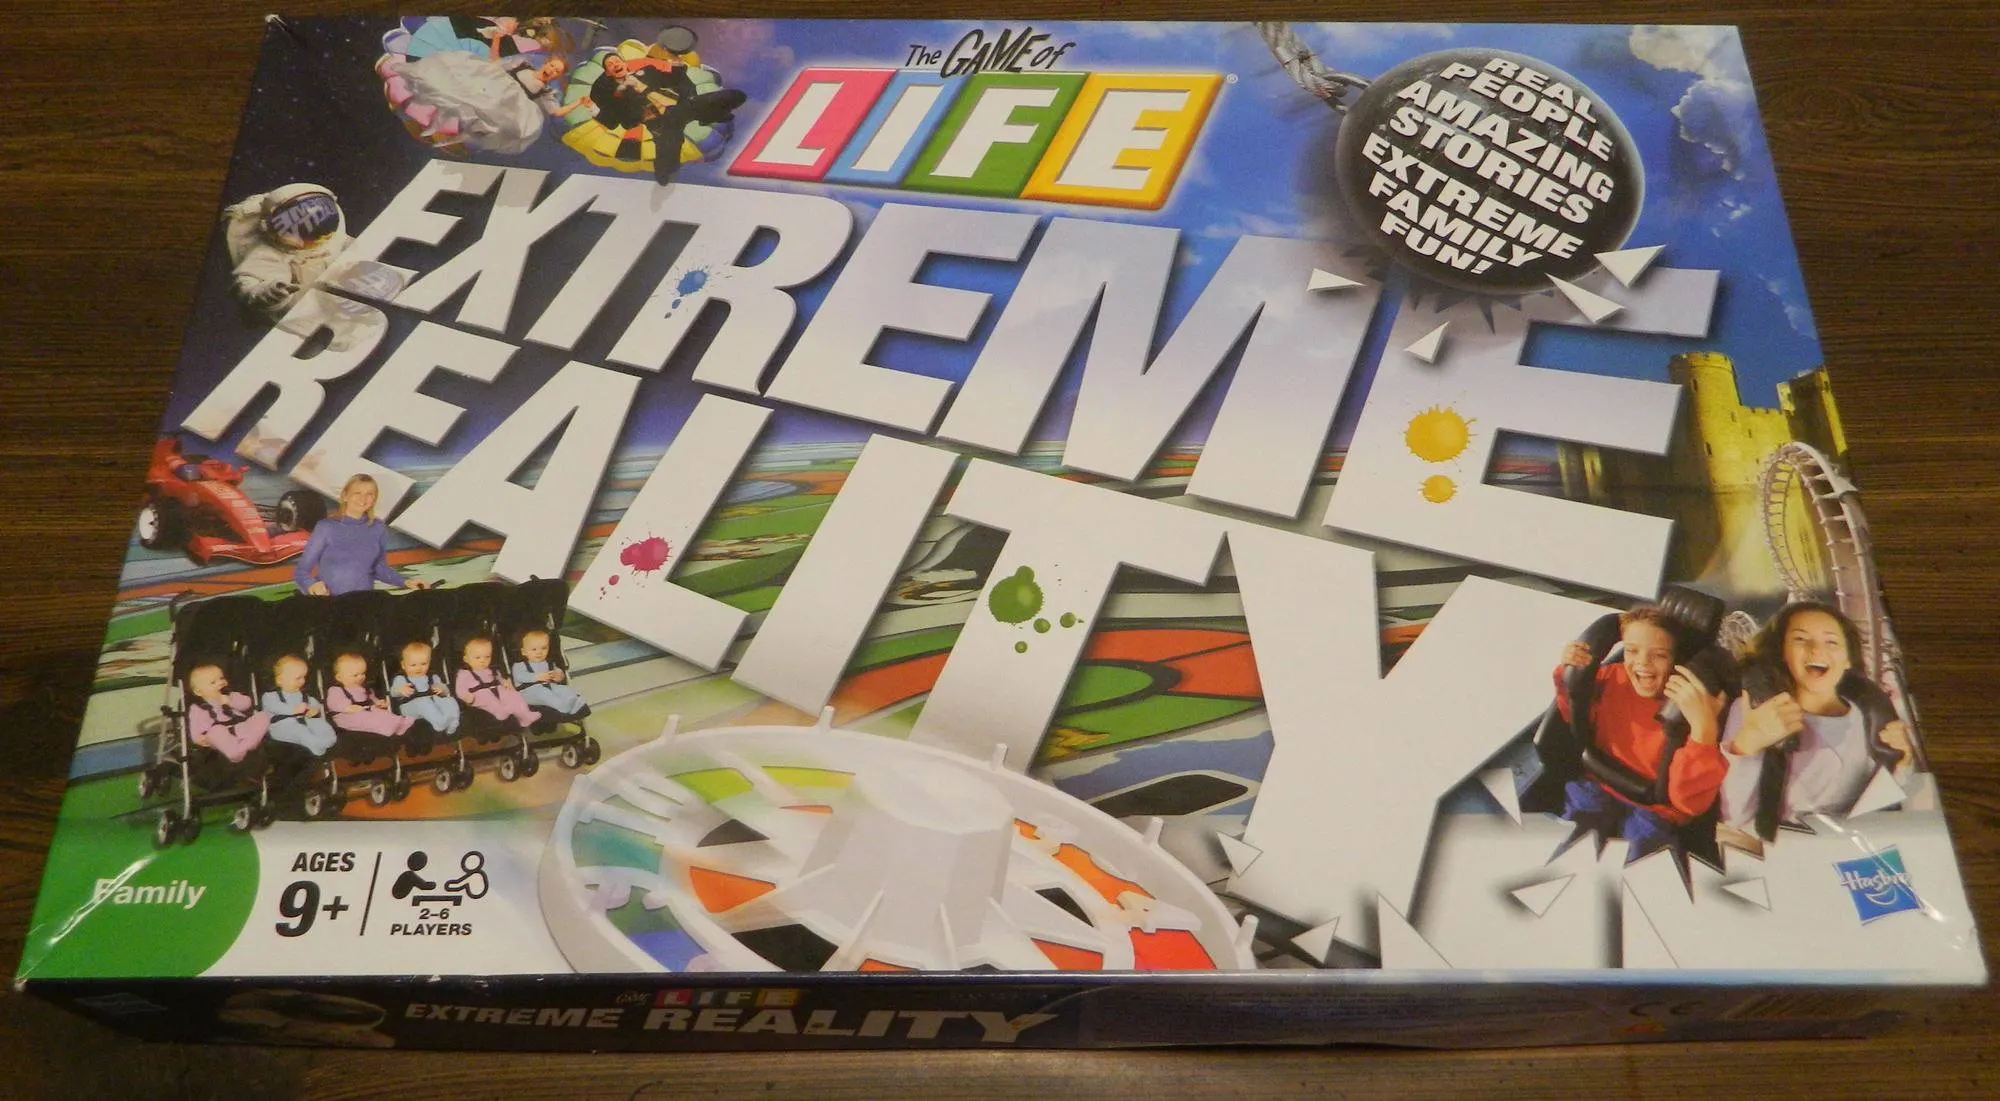 The Game of Life Board Game, by Winning Moves Games 